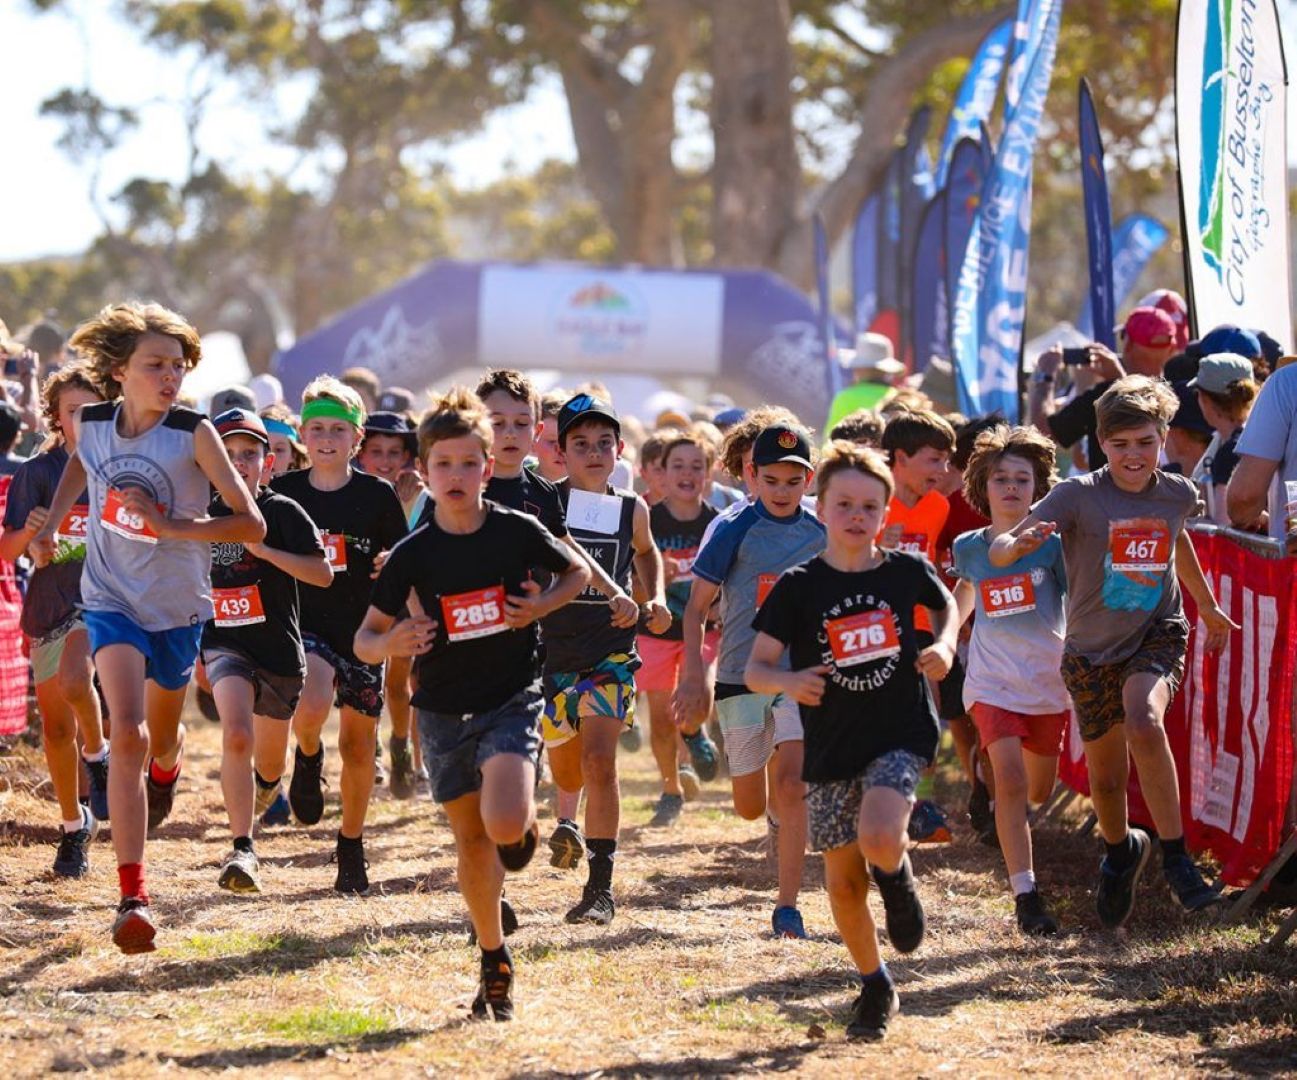 Kids running at the Eagle Bay Epic Adventure Race.